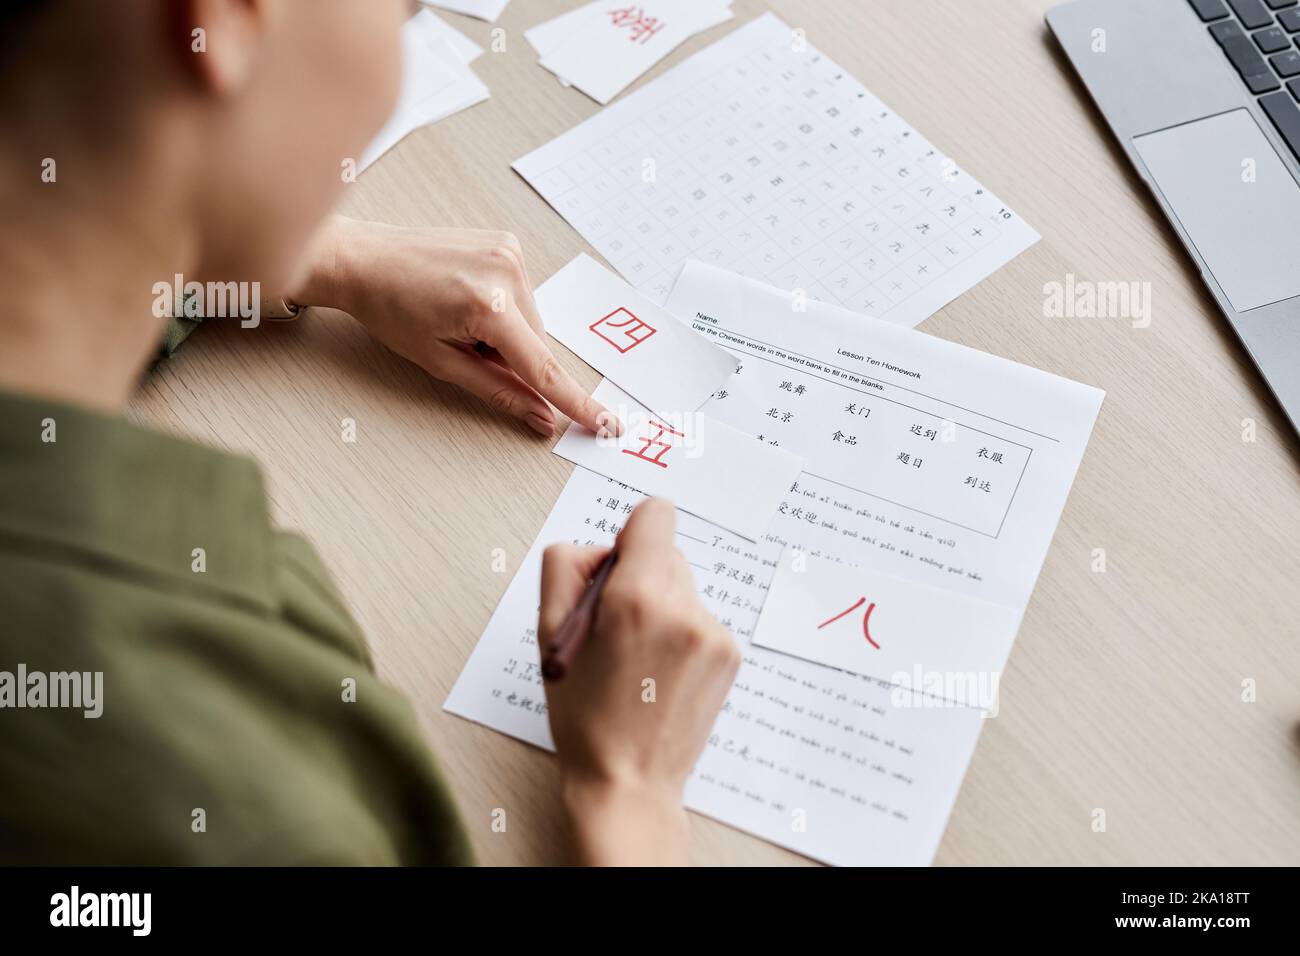 Close-up of young woman pointing at hieroglyph in table printed on paper while studying Chinese language on her own Stock Photo